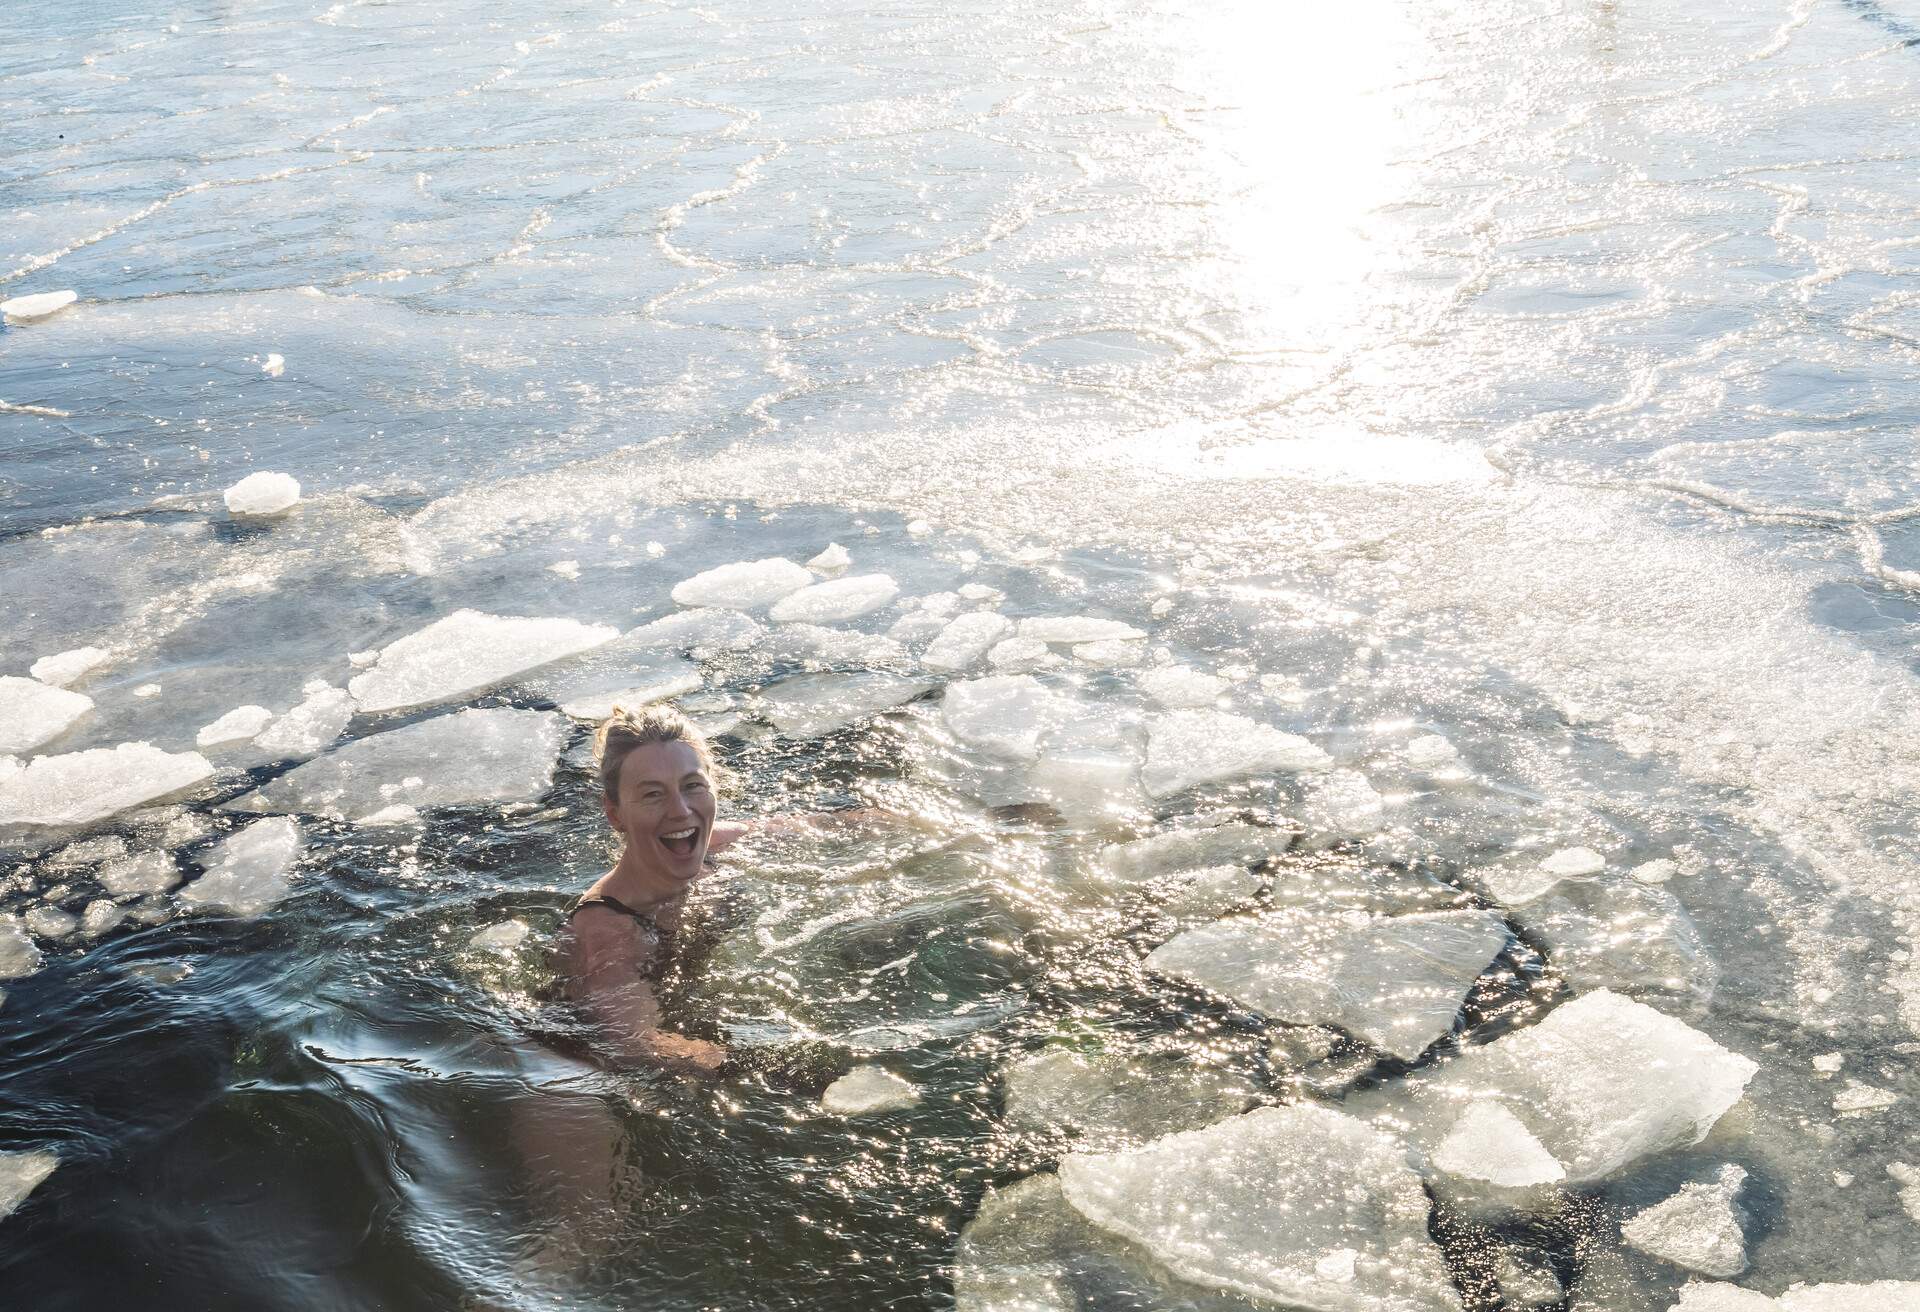 A happy woman treading in an icy ocean.